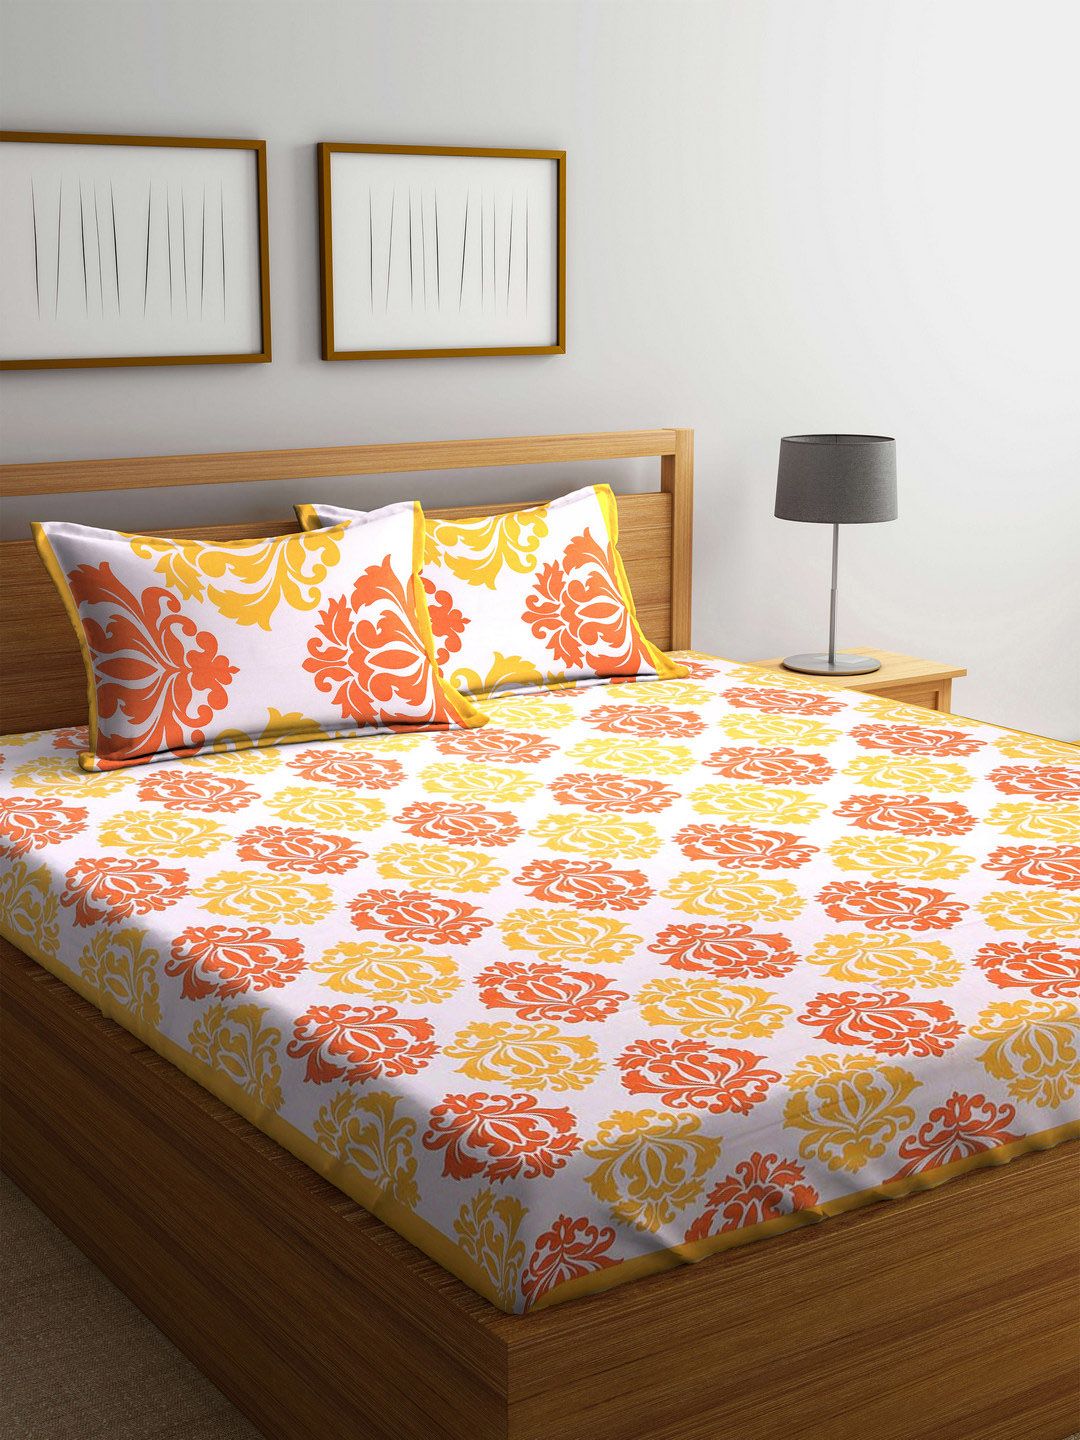 Rajasthan Decor White & Yellow Floral Flat 144 TC Cotton 1 King Bedsheet with 2 Pillow Covers Price in India